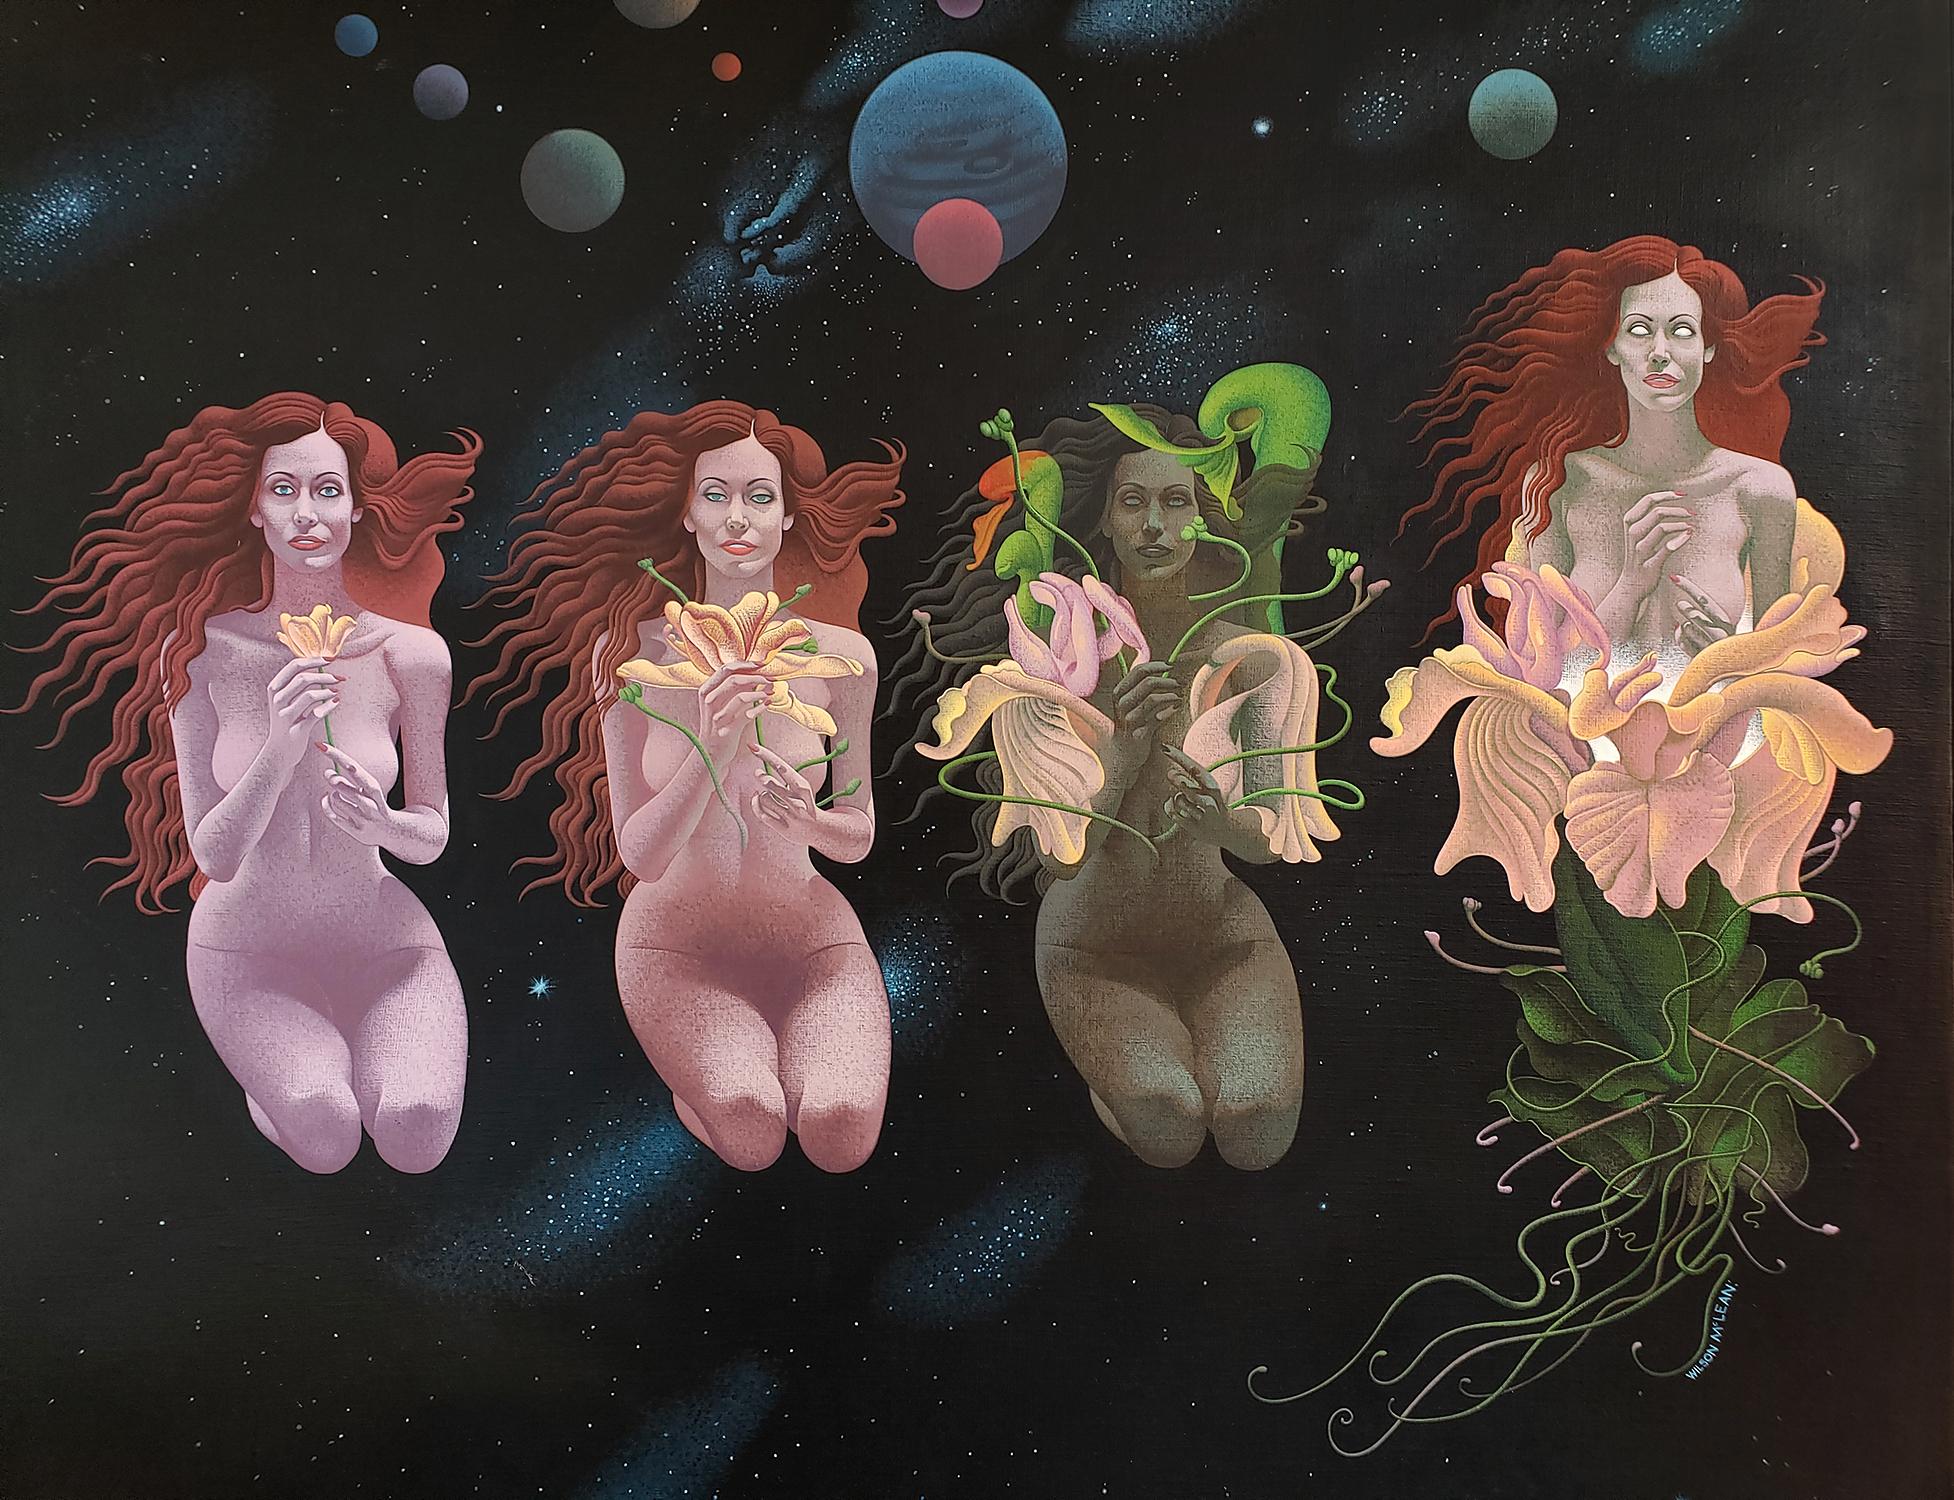 Celestial Metamorphosis -Nude Sci-Fi Woman becomes a flower in outer space - Painting by Wilson McLean